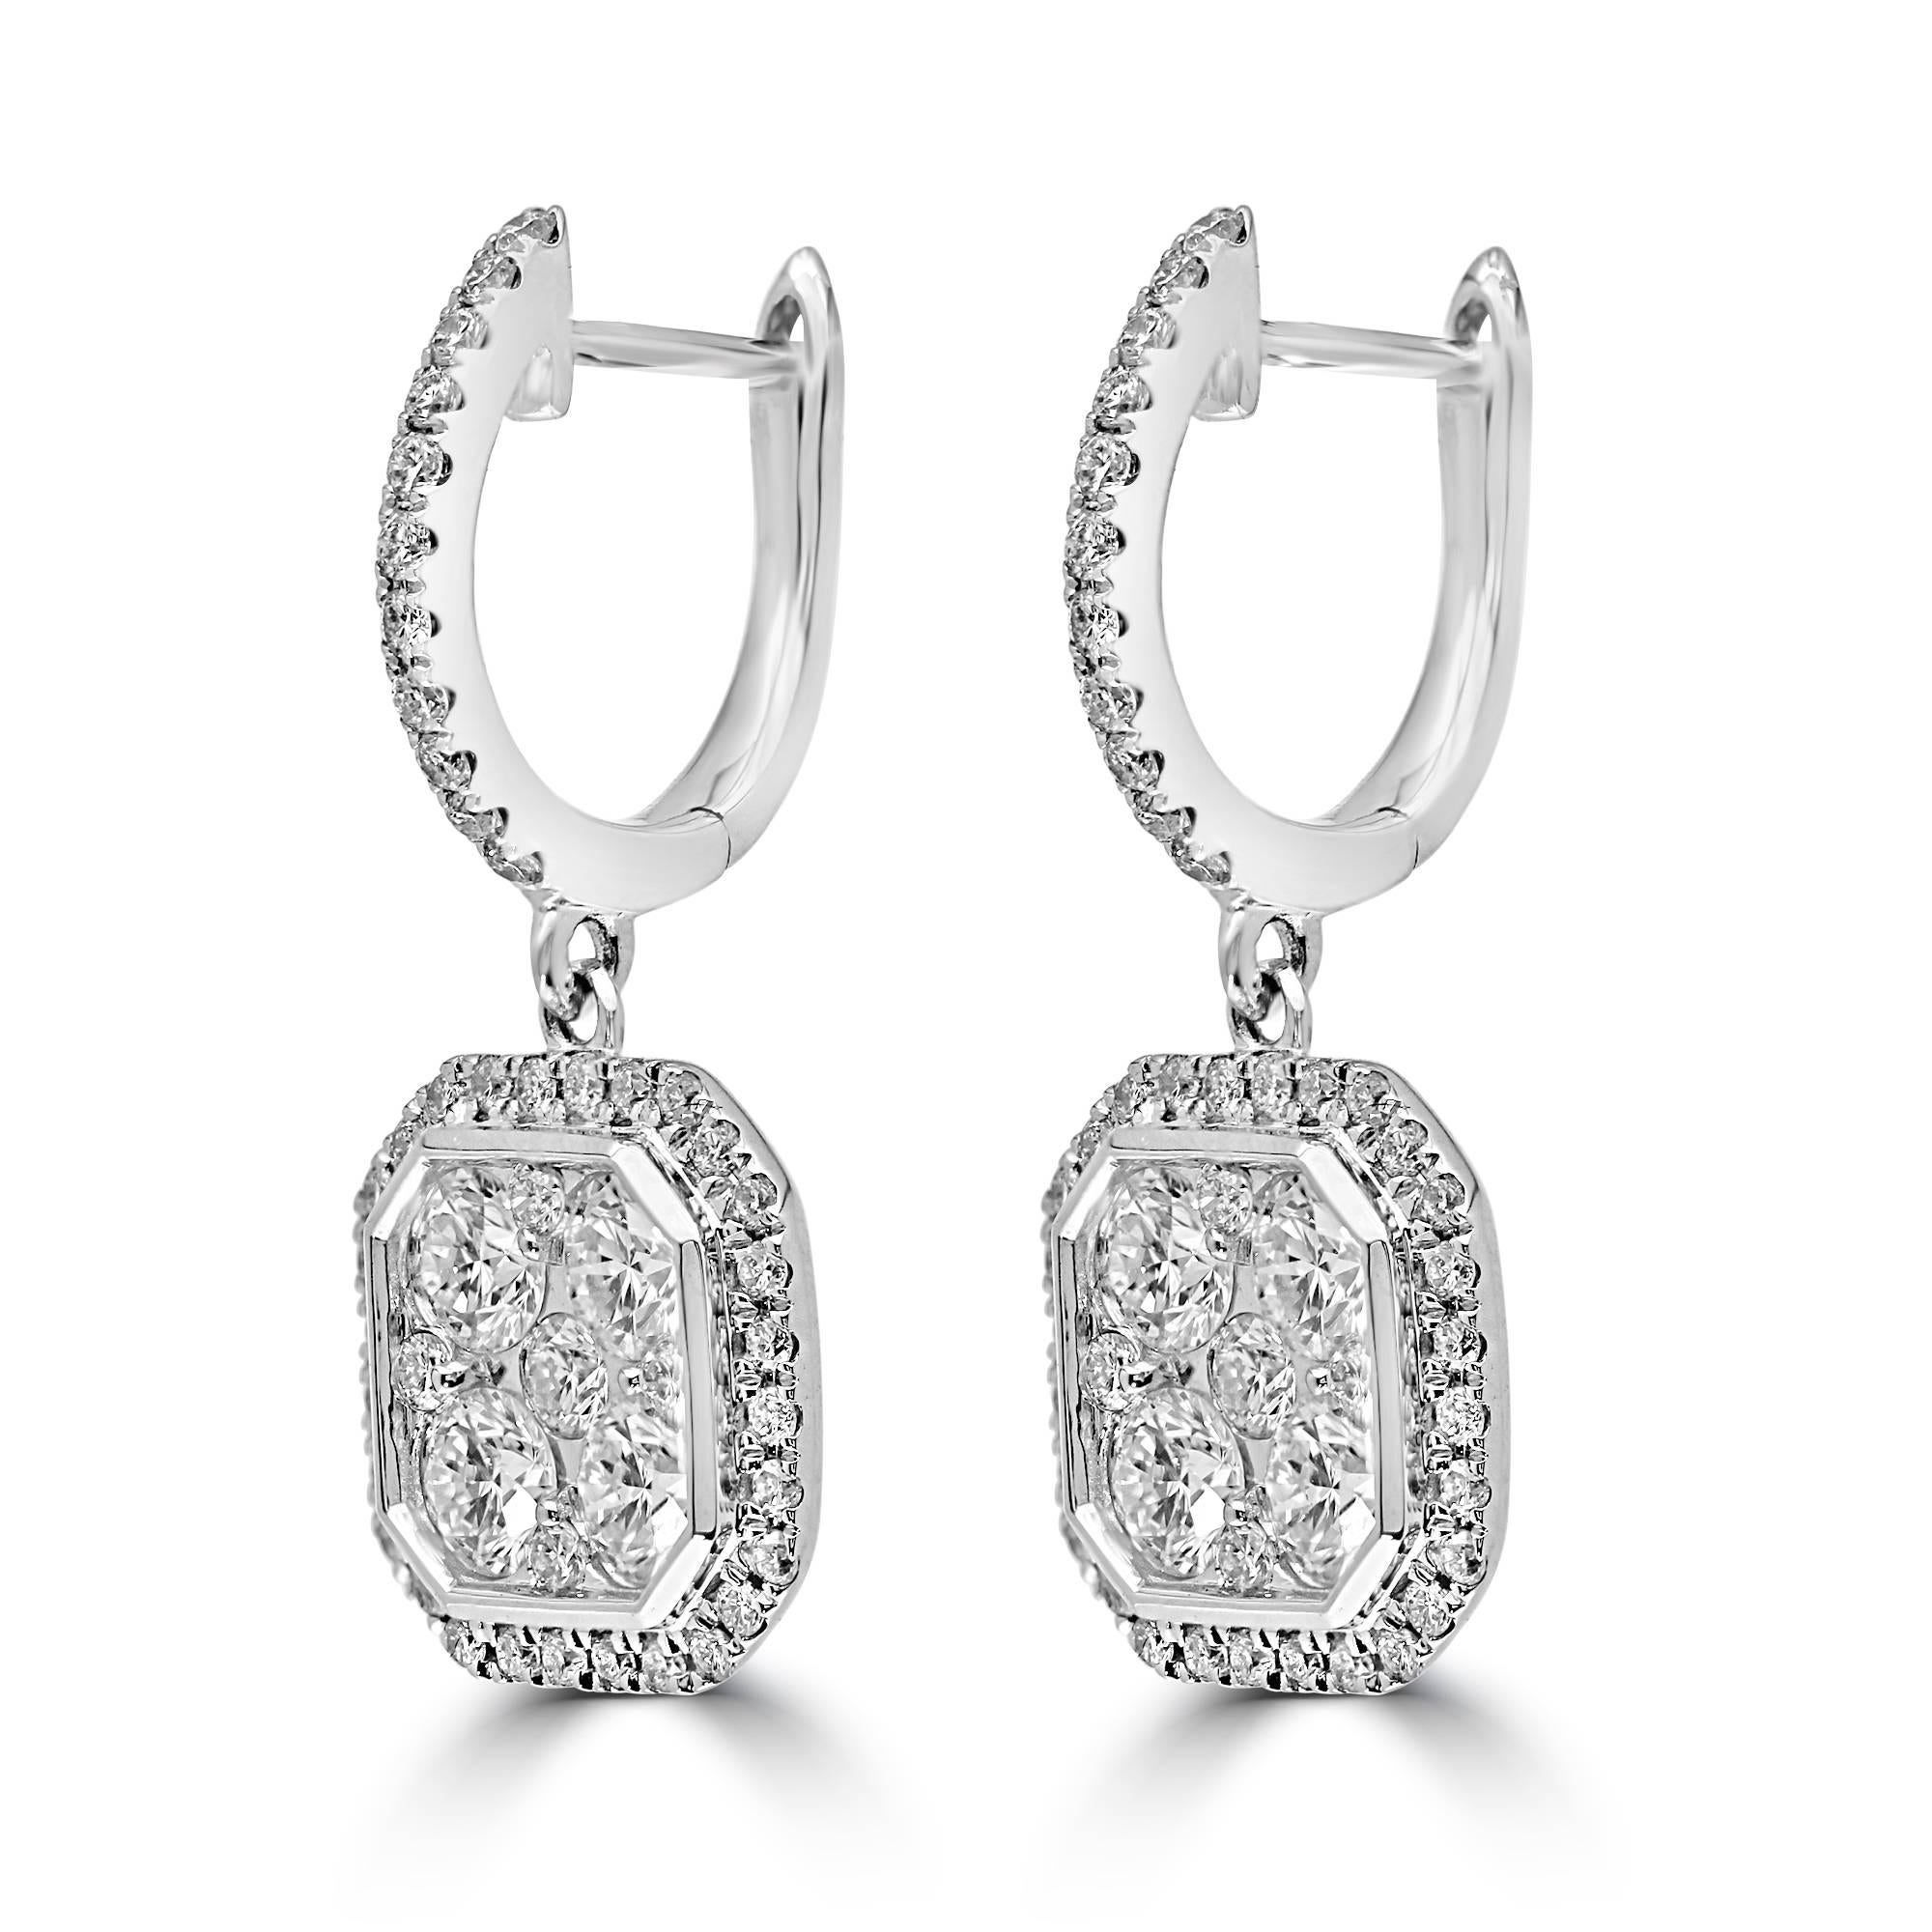 Classic cluster octagonal dangling diamond earrings.
1.50ct round brilliant cut diamonds mounted in 18kt white gold.
Matching pendant is available.
Contact us for more information.